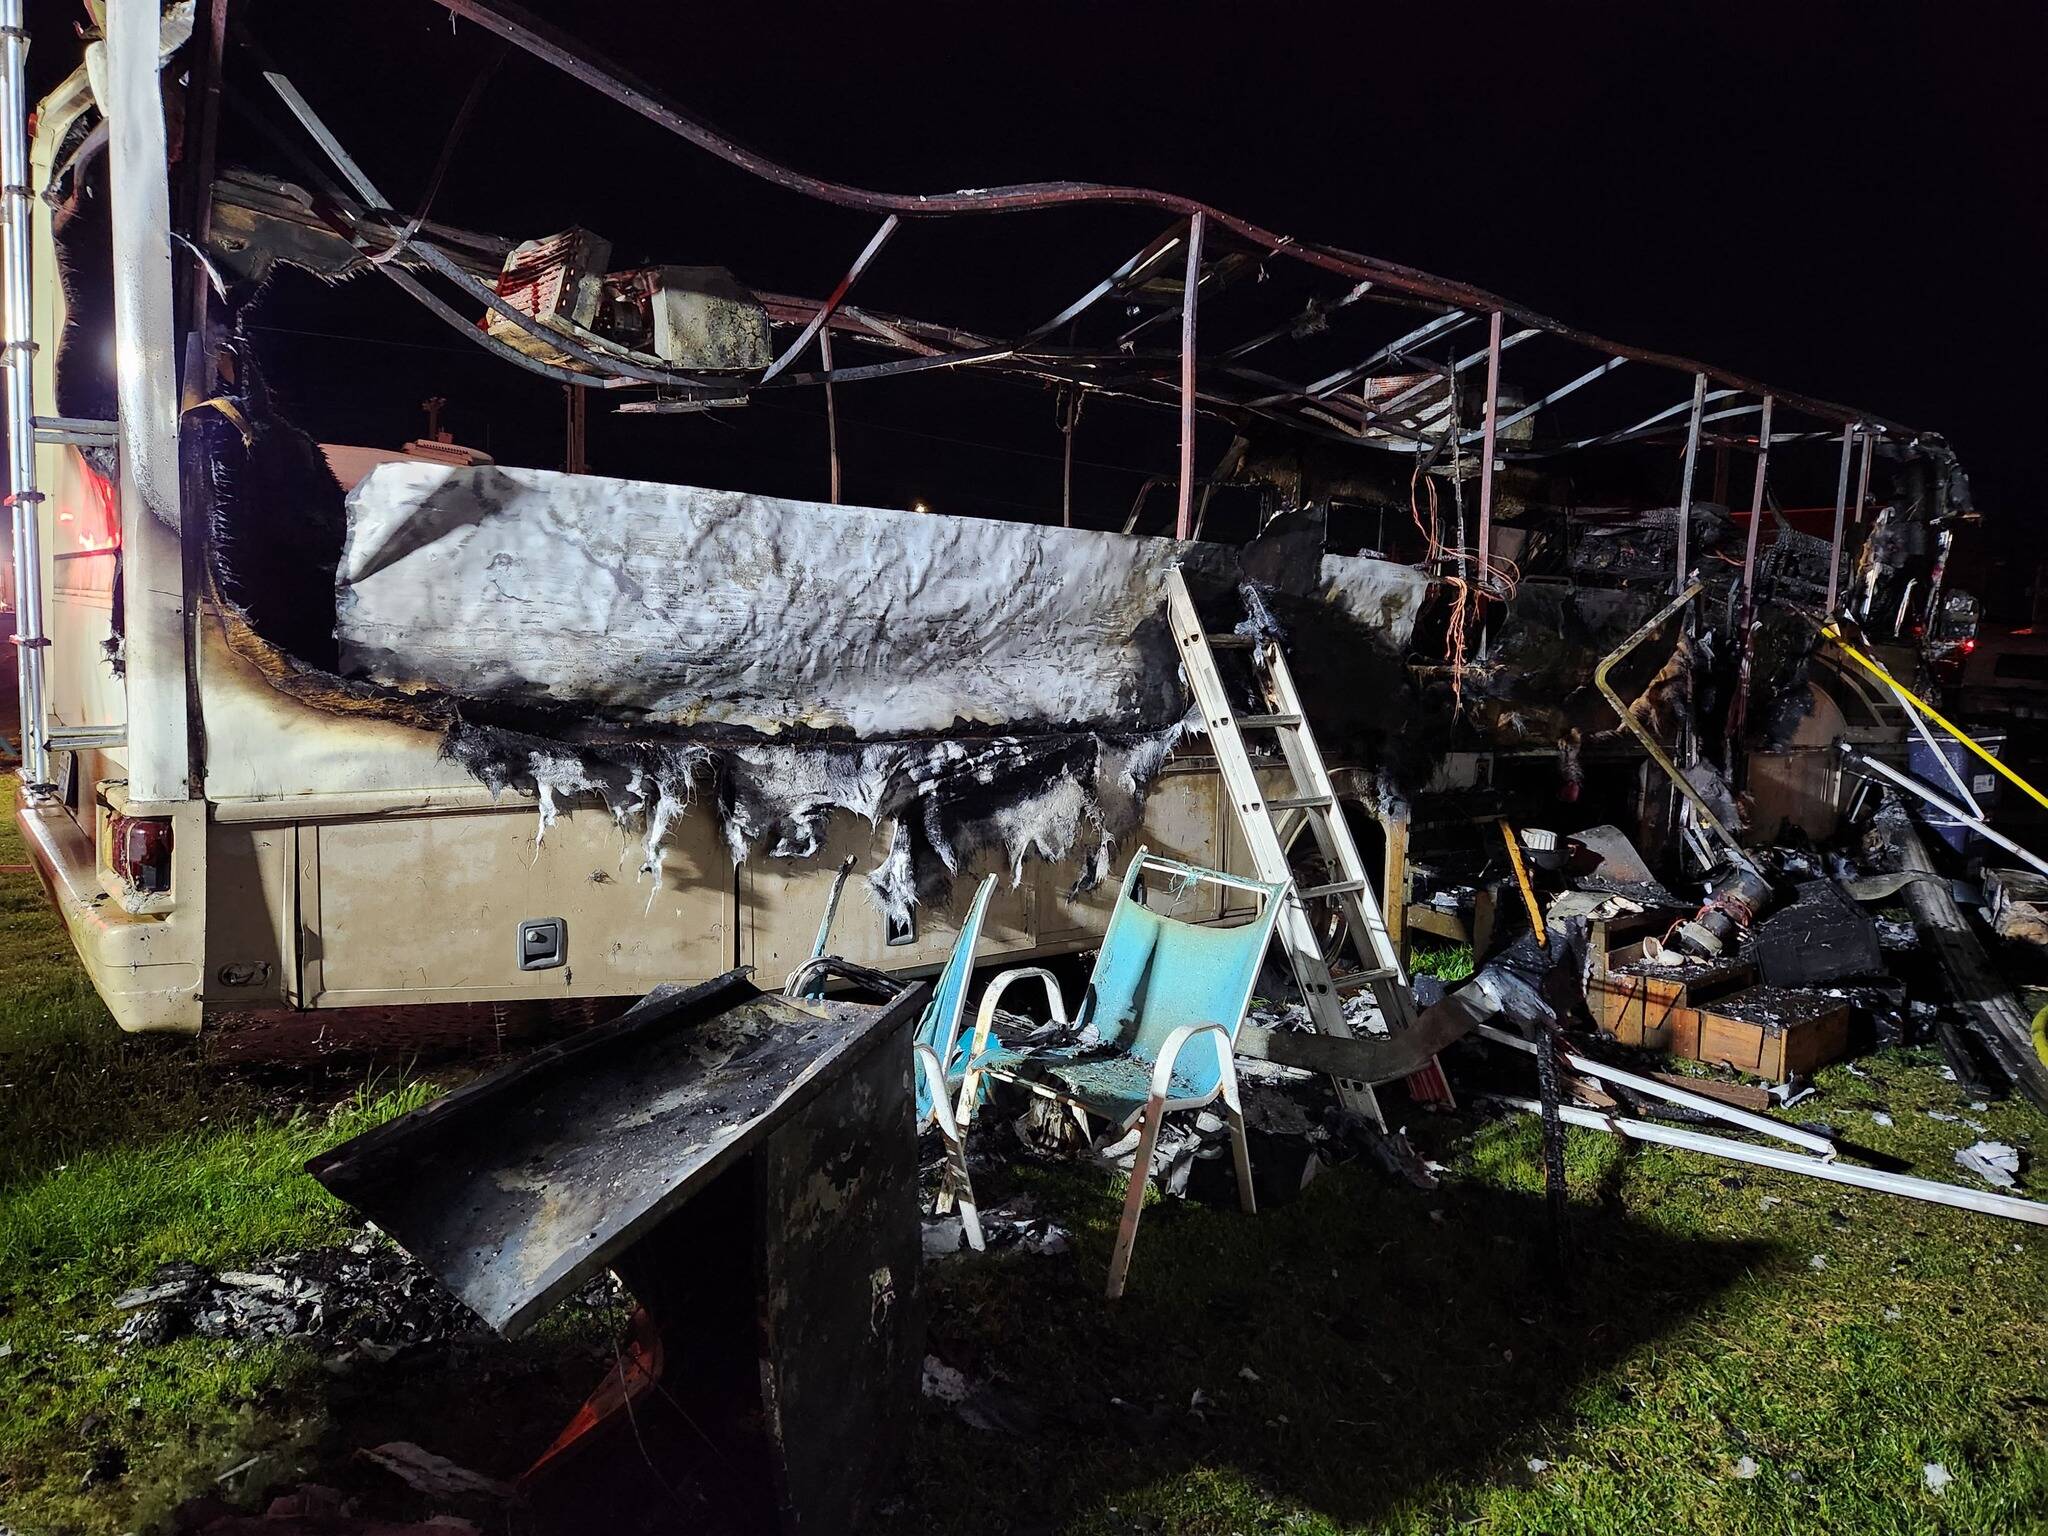 Courtesy photo / SBRFA
Firefighters from the South Beach Regional Fire Authority responded to an RV fire on Tuesday evening that completely gutted the vehicle.